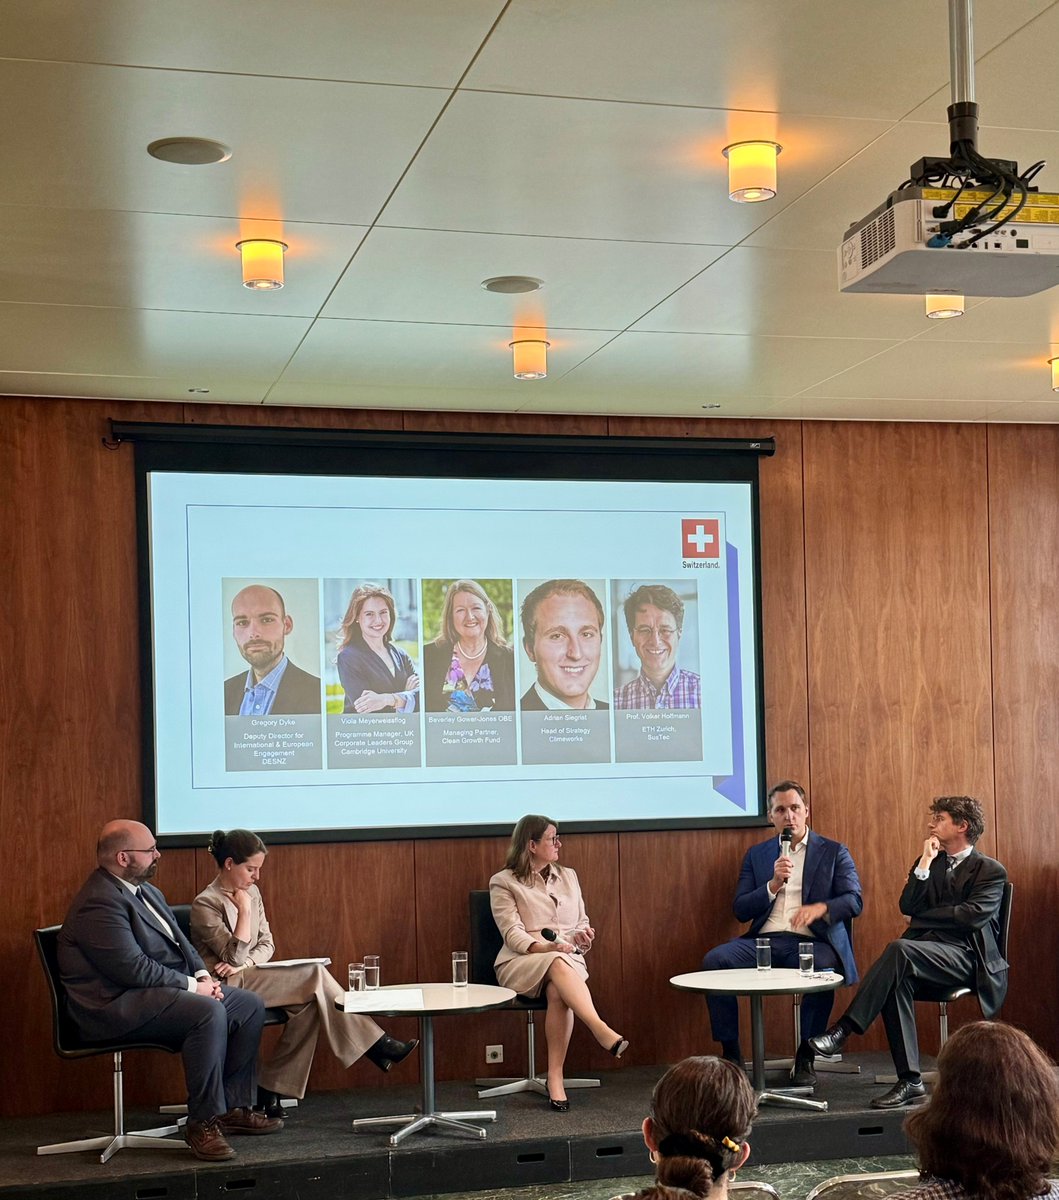 How can we successfully implement and scale innovative solutions for the #NetZero transition? Fascinating discussions at @SwissEmbassyUK with Swiss carbon removal unicorn @Climeworks and representatives from government, global business, academia and venture capital.